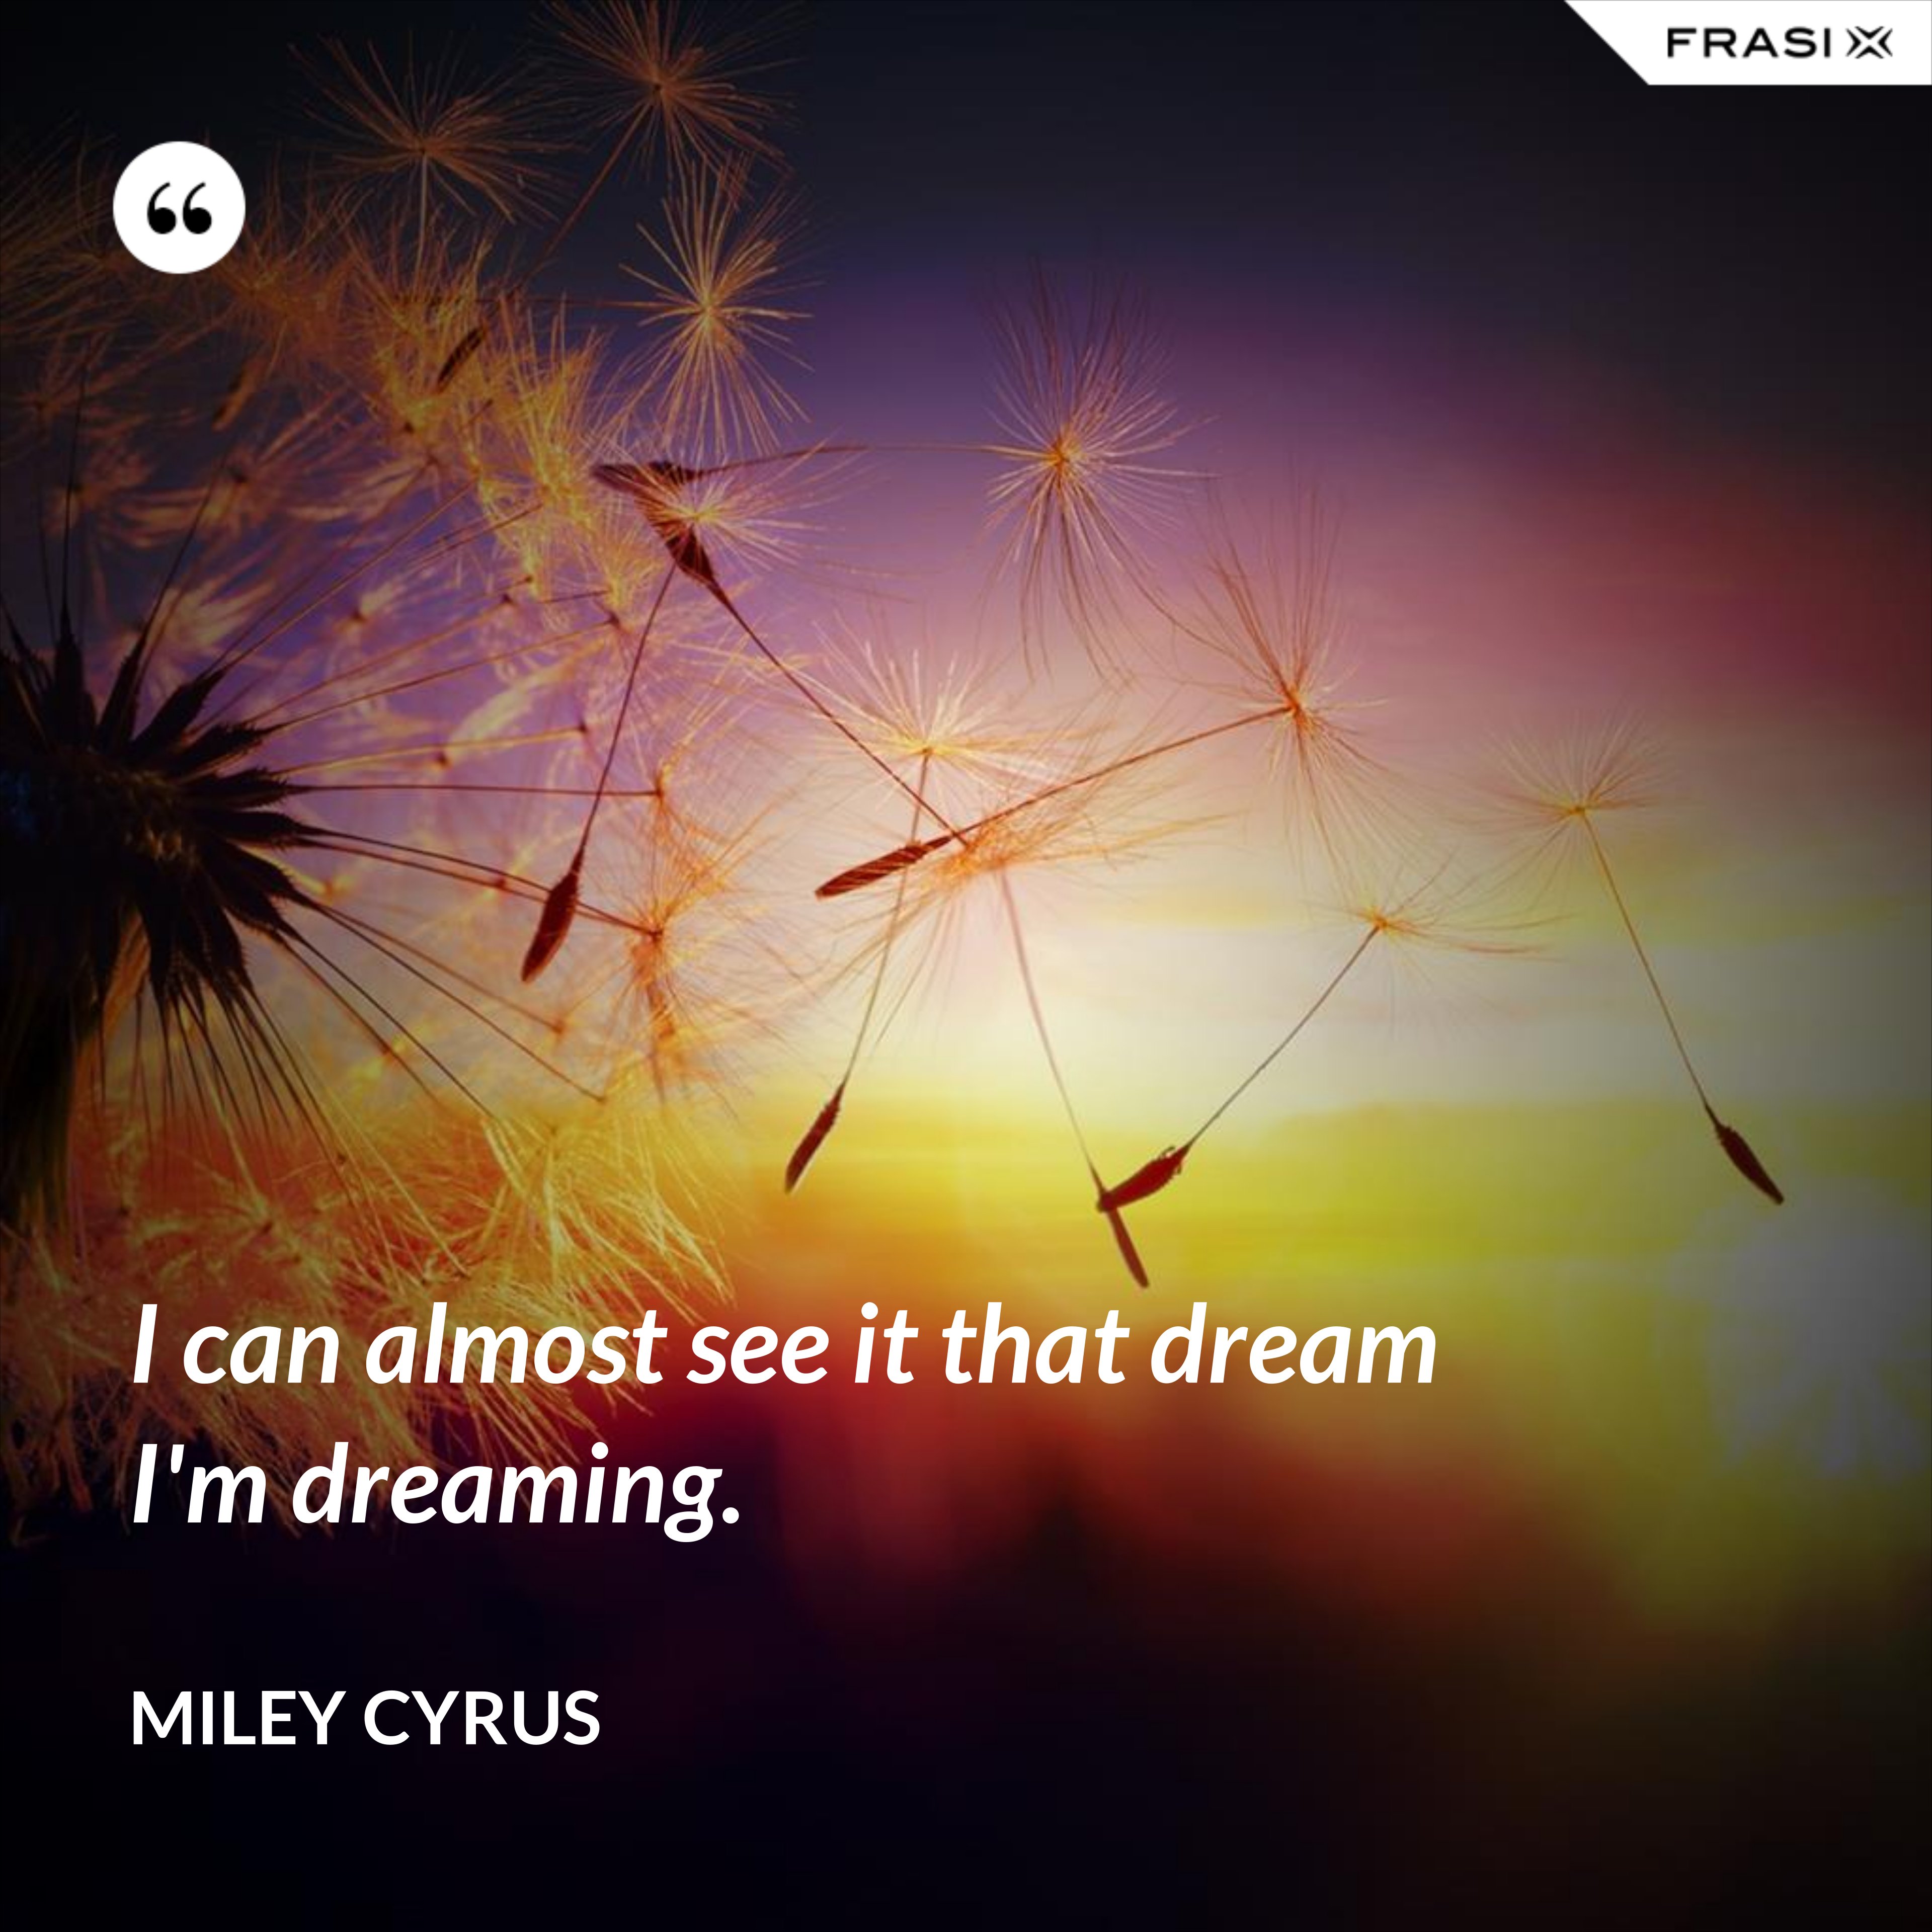 I can almost see it that dream I'm dreaming. - Miley Cyrus